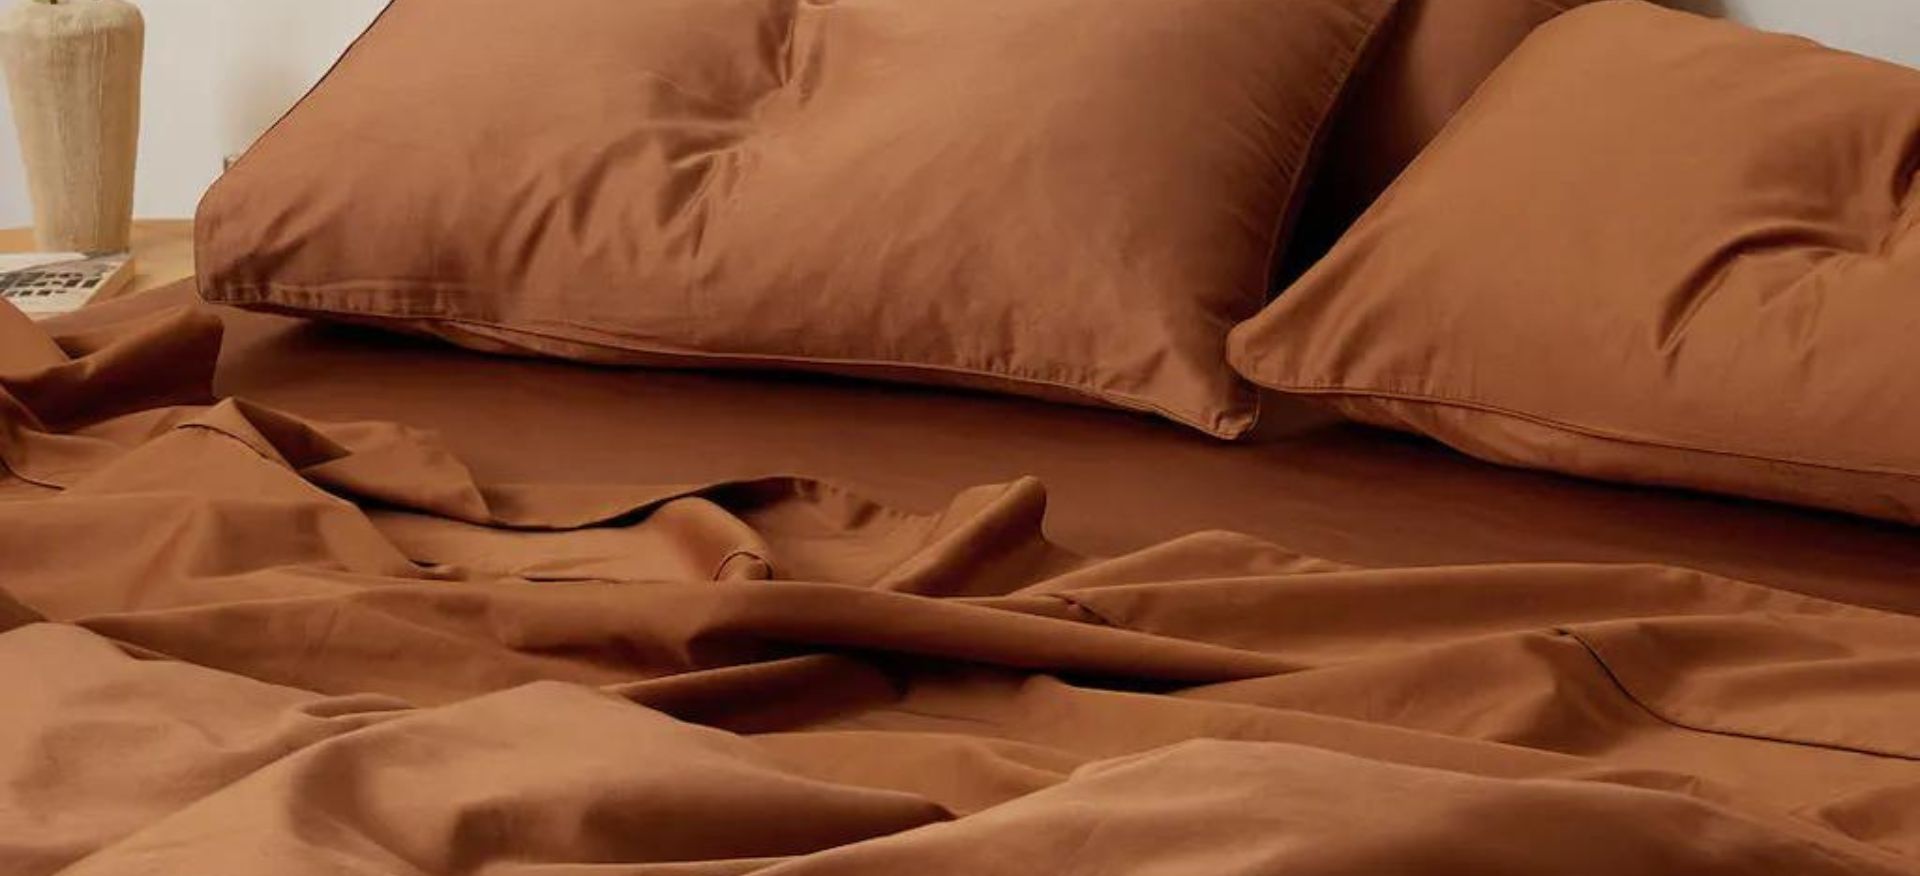 A cozy bedroom scene with rumpled terracotta-colored bed sheets and fluffy pillows inviting relaxation.